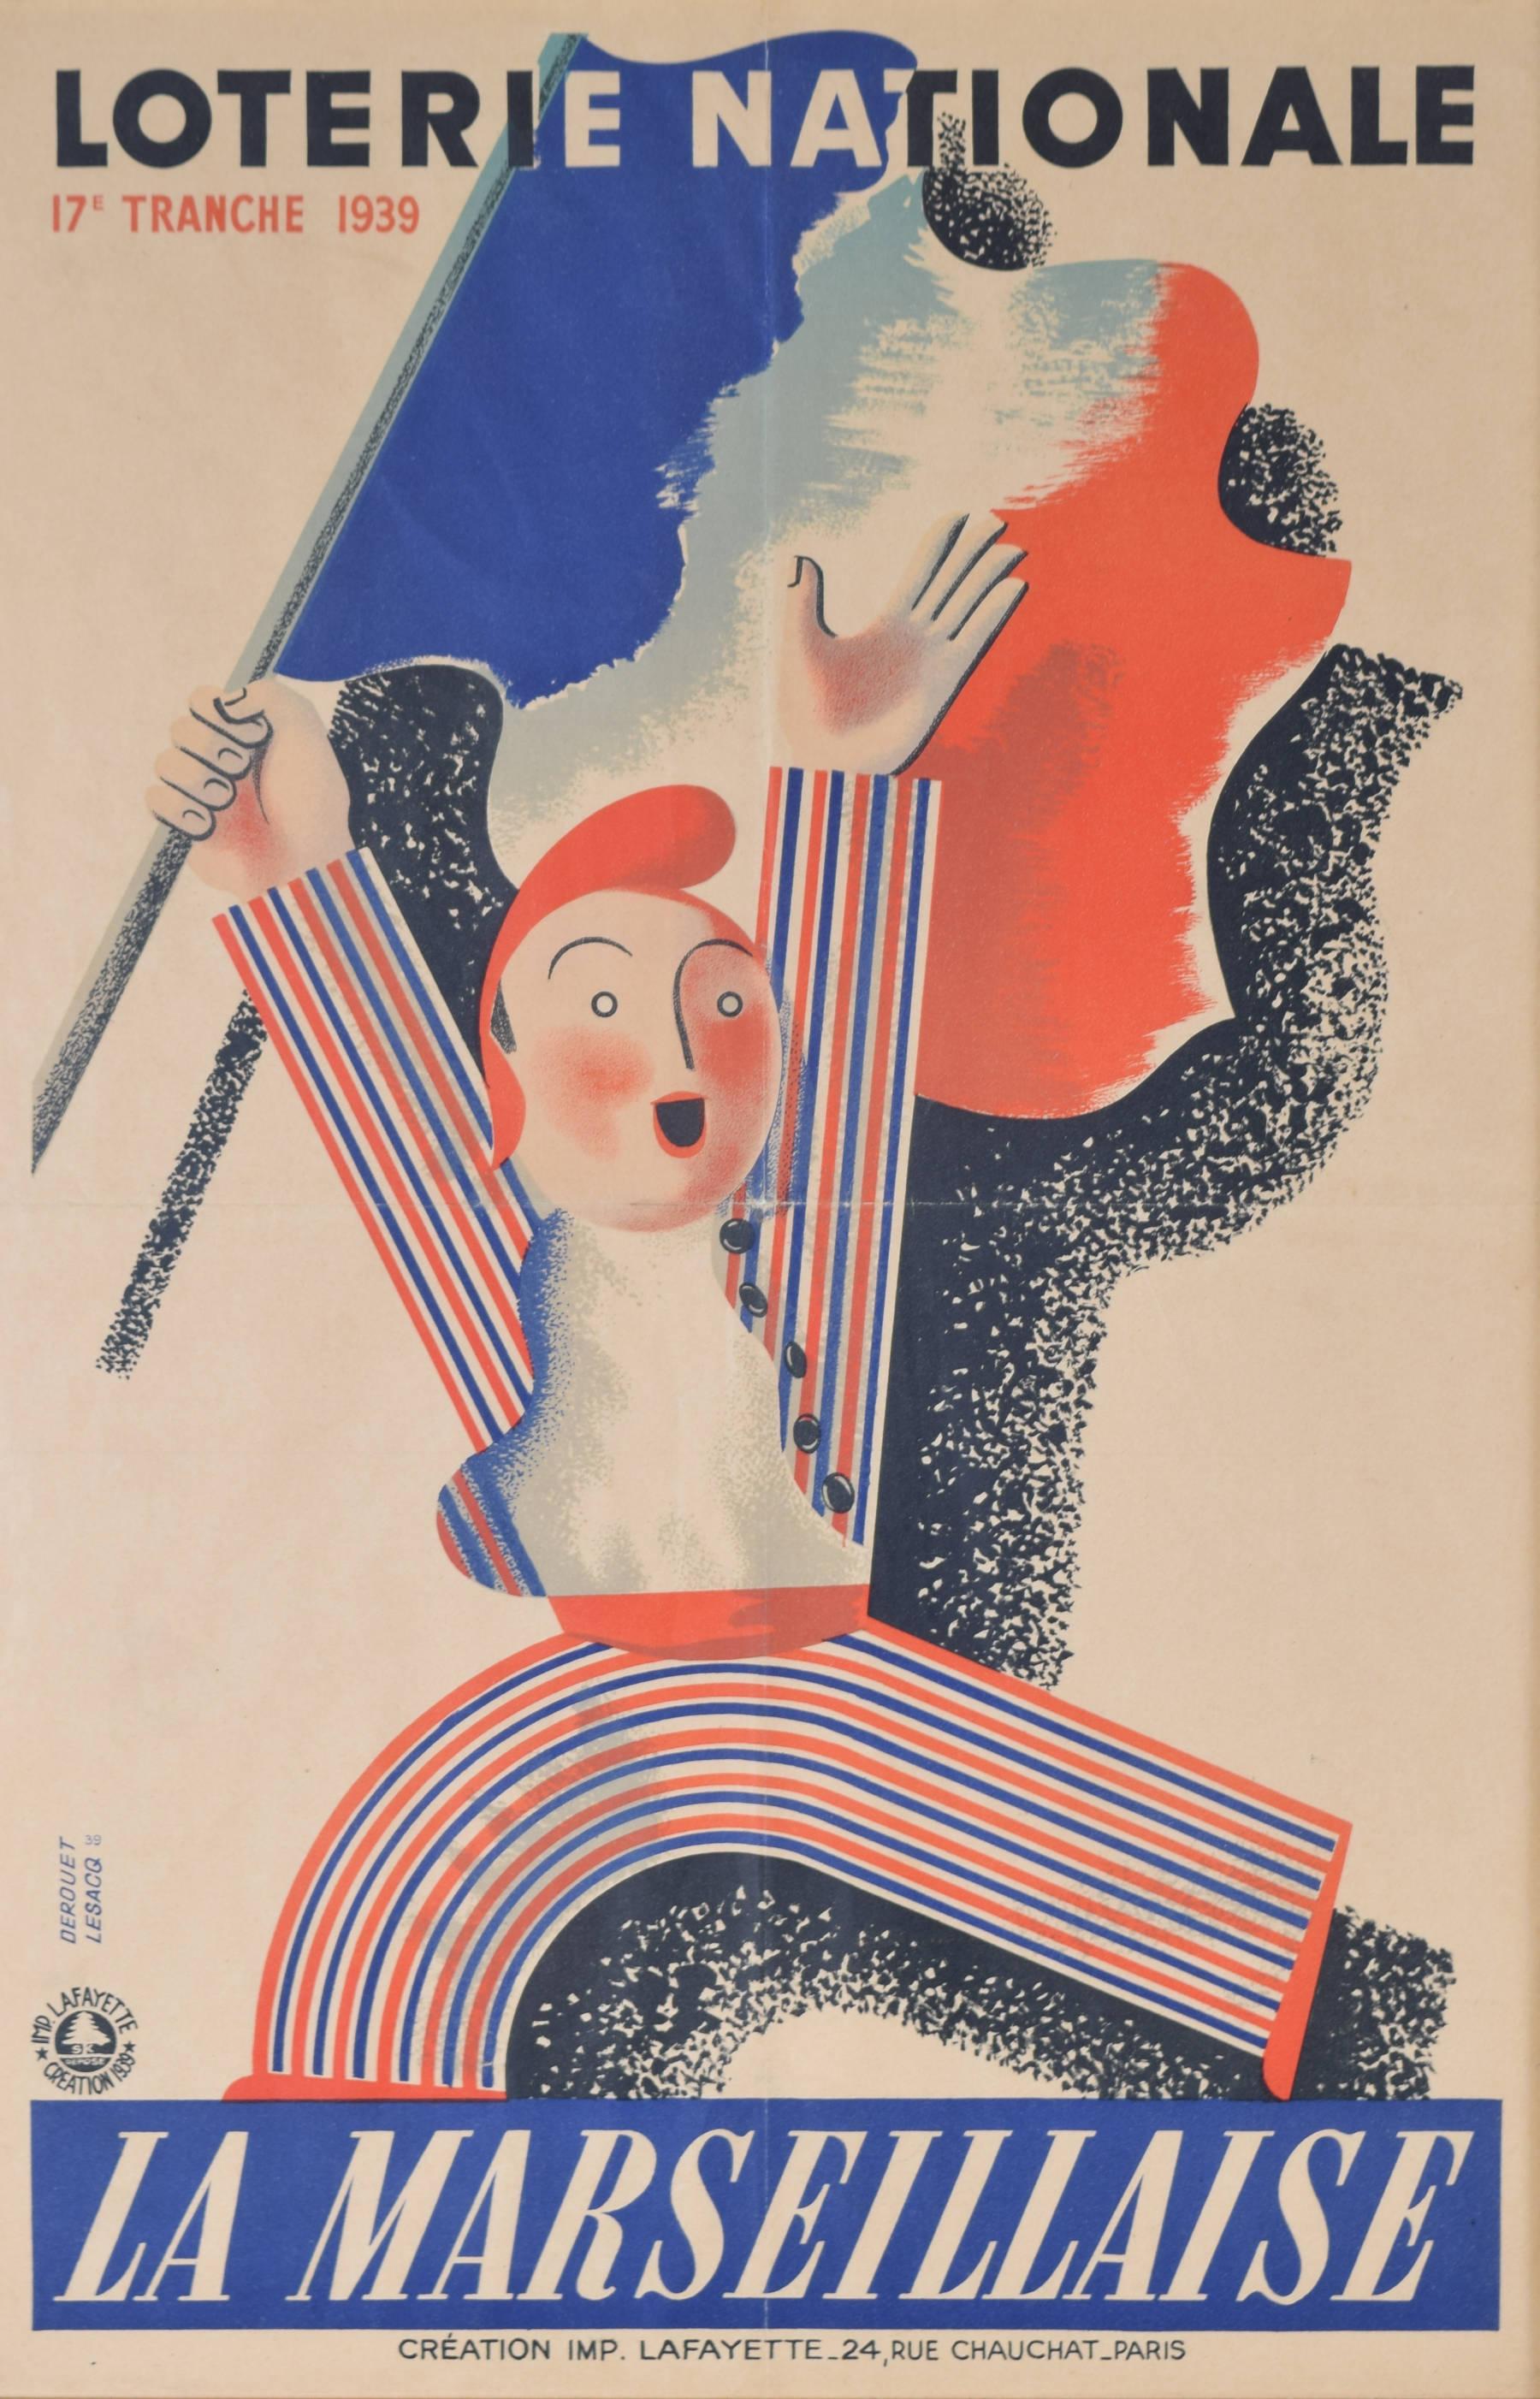 To see our other original vintage posters, scroll down to "More from this Seller" and below it click on "See all from this Seller" - or send us a message if you cannot find the poster you want.

Edgard Derouet (1910 - 2001)
Loterie Nationale La